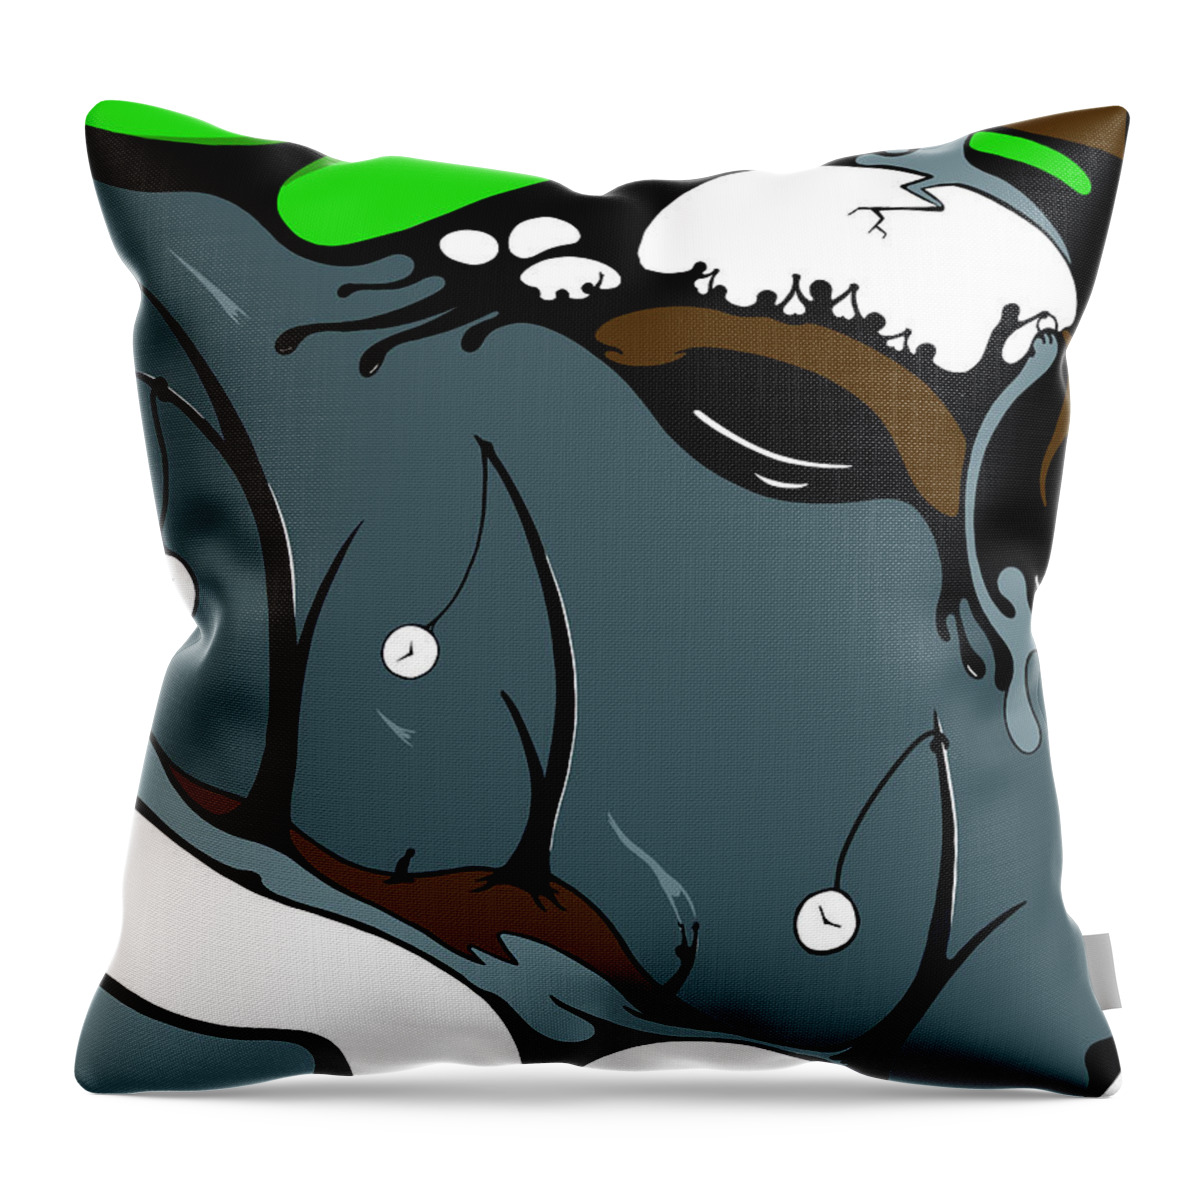 Climate Change Throw Pillow featuring the digital art Looking Glass by Craig Tilley